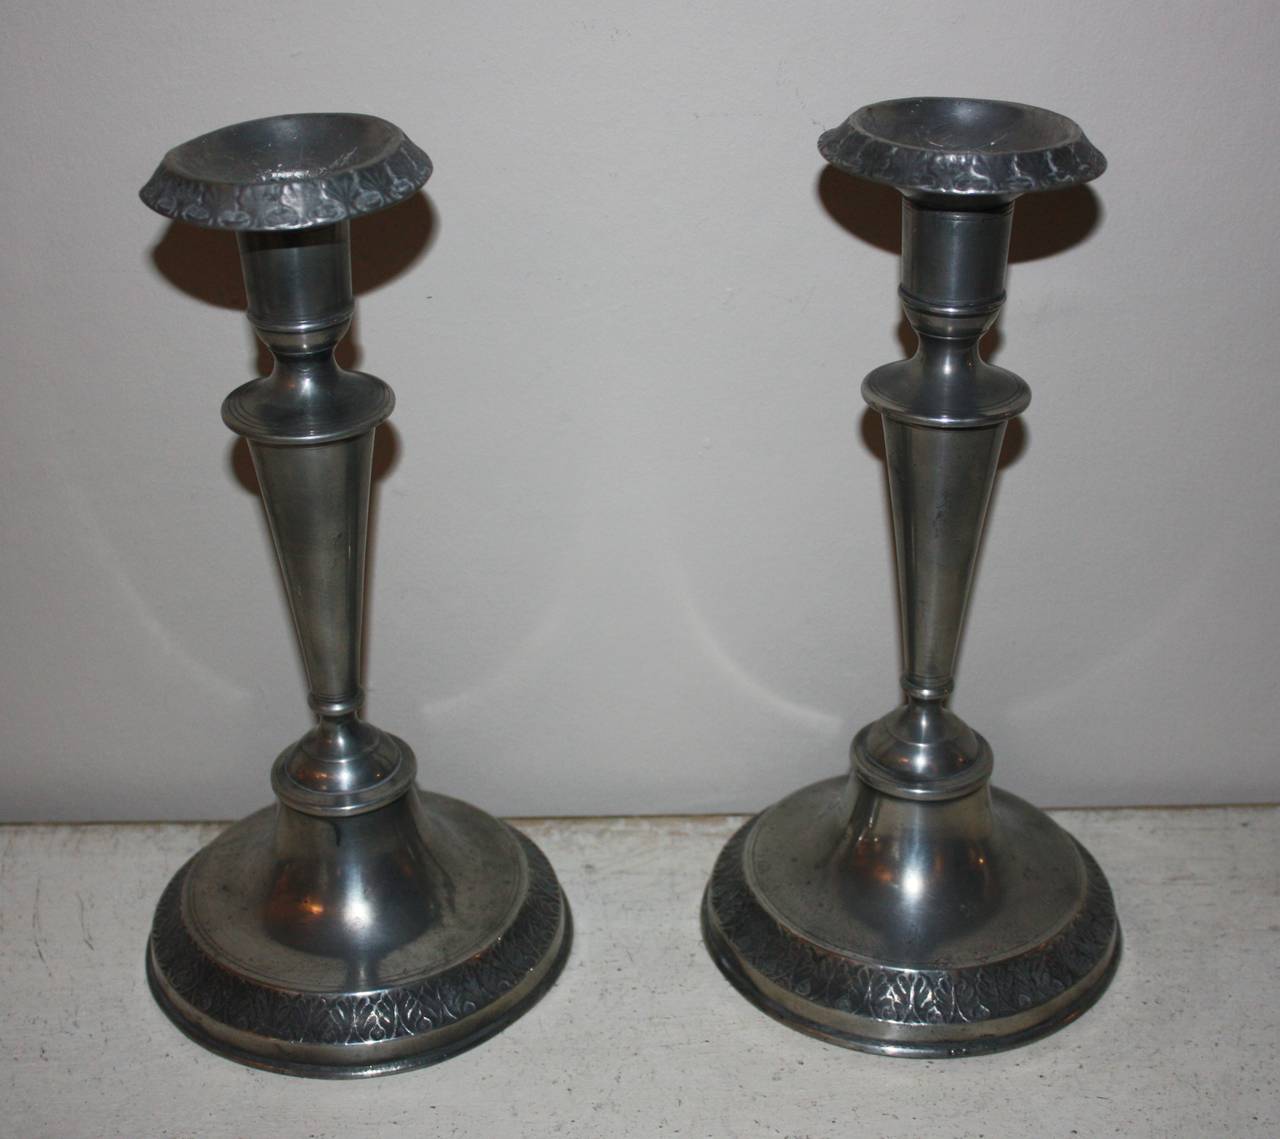 Very nice pair of pewter candleholders with detachable crowns, from 1802, made in the city Svendborg in Denmark by pewtersmith Carl Magnus.